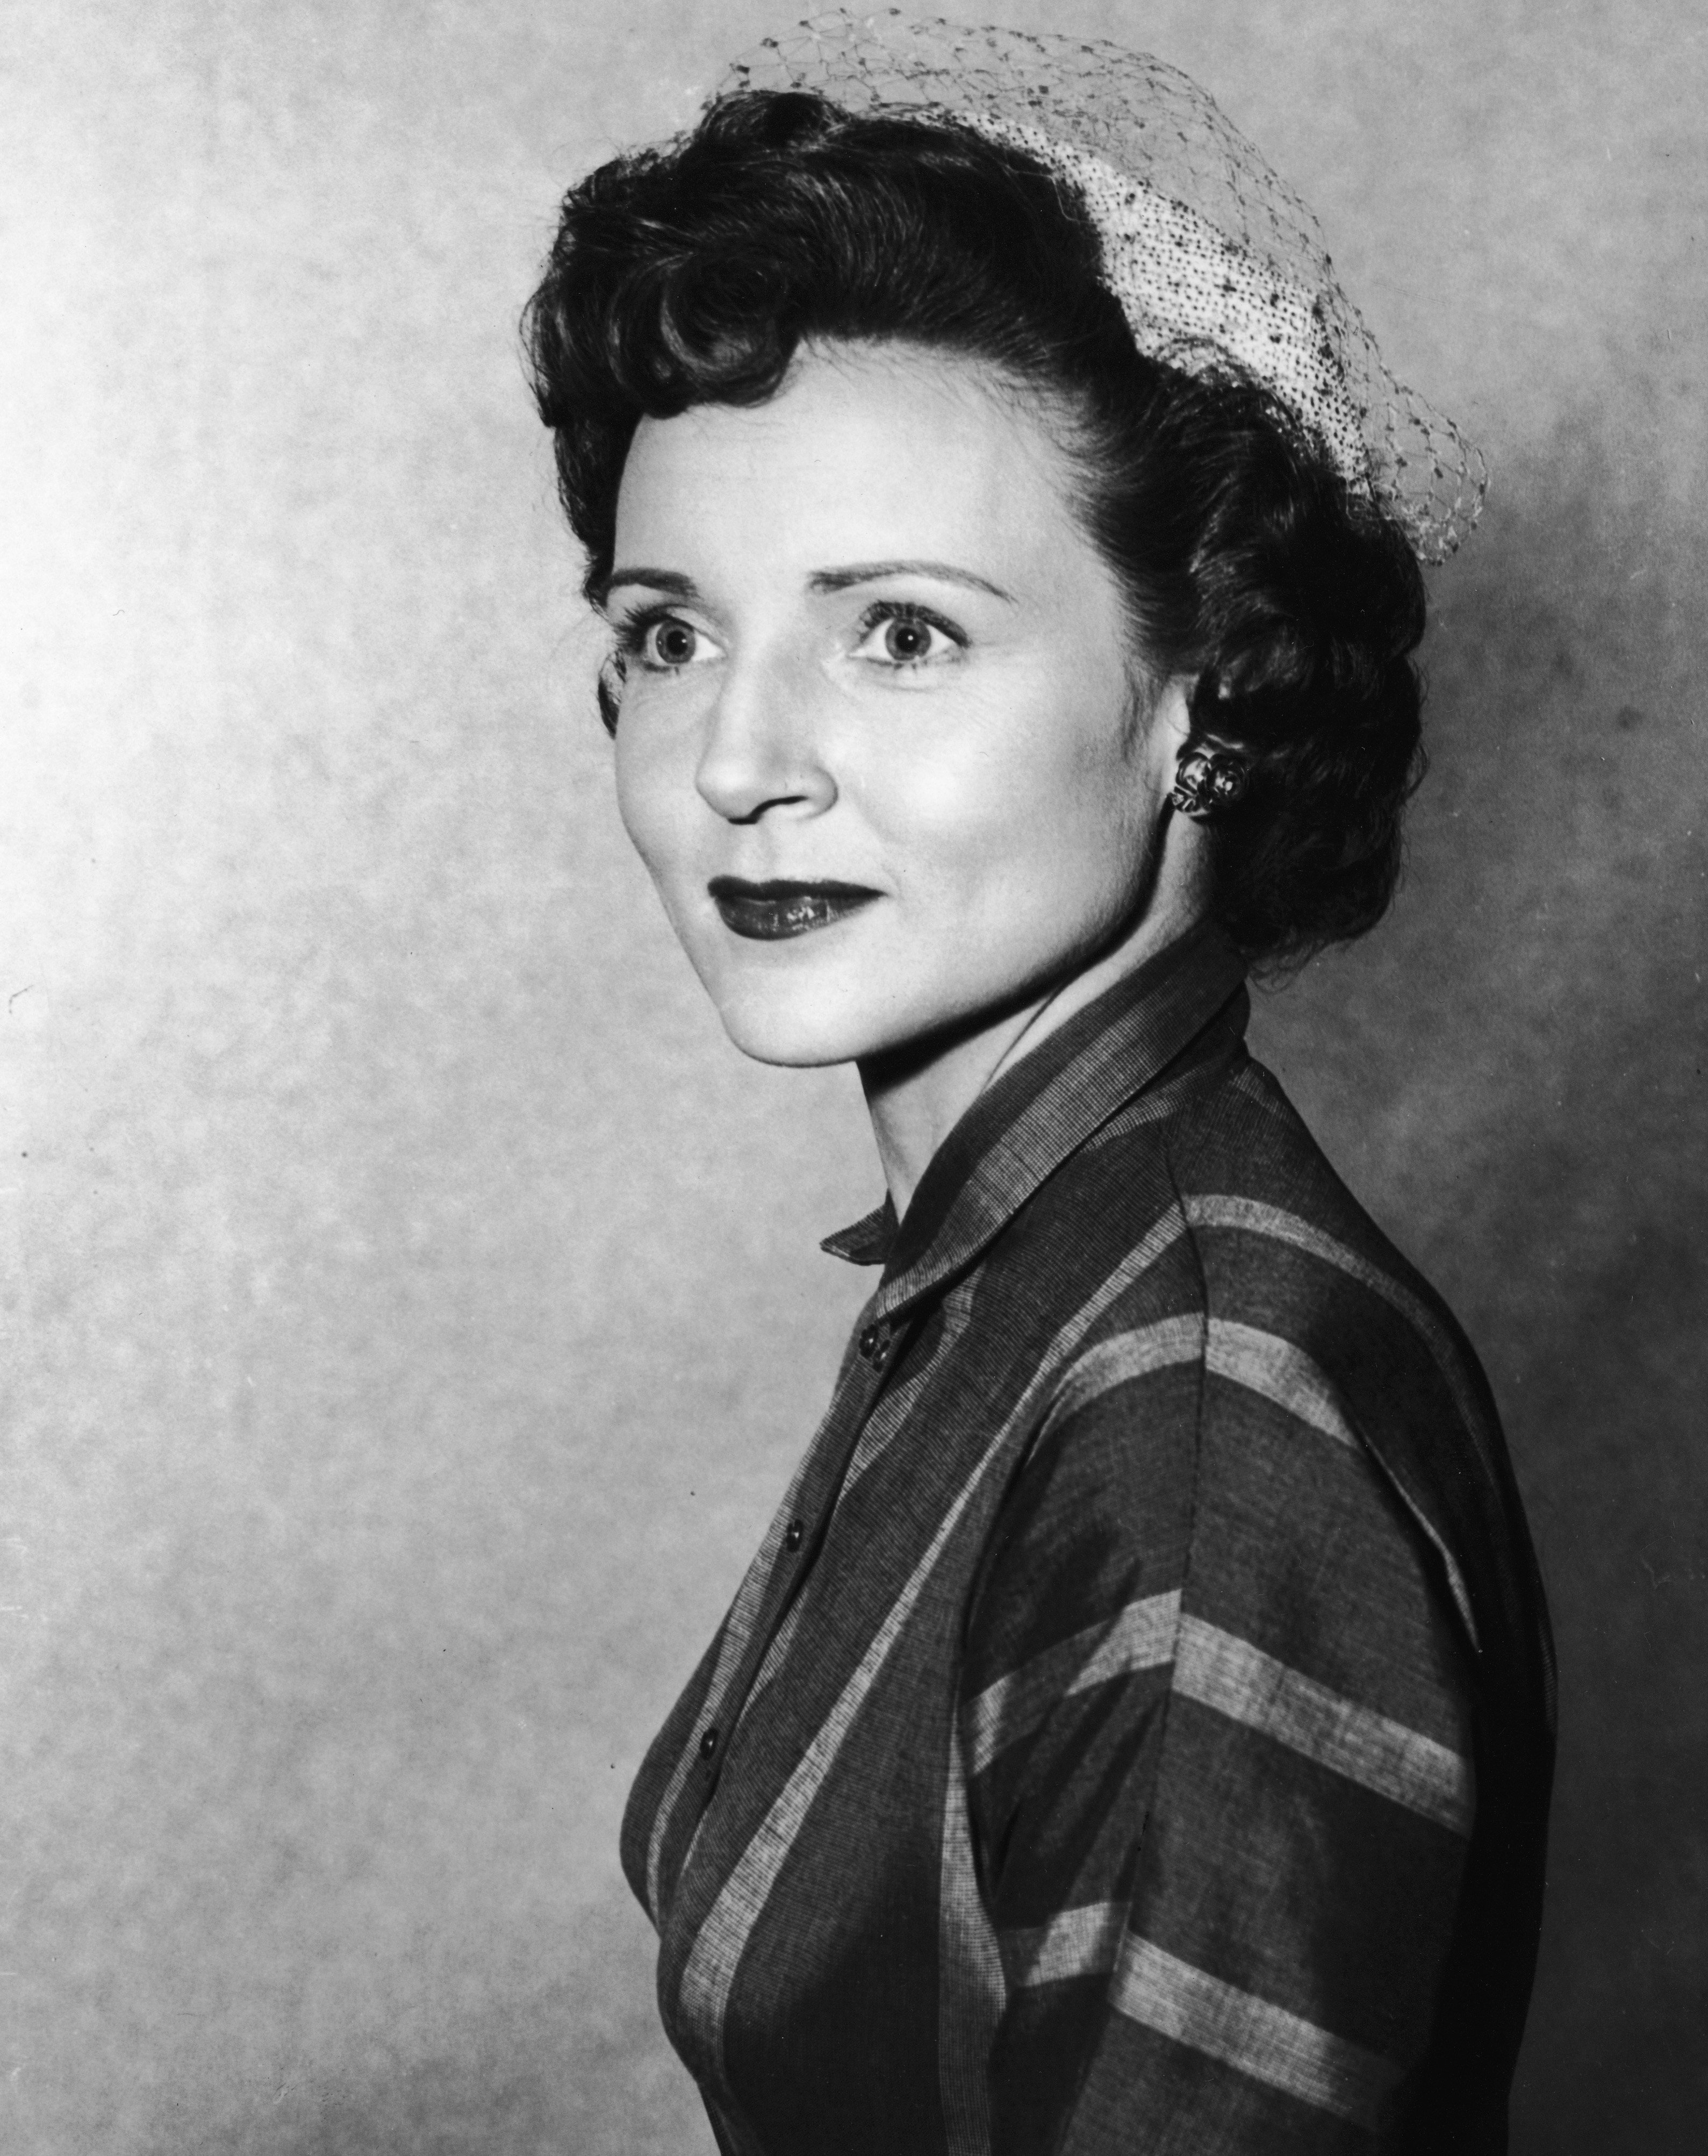 A headshot portrait of American actor Betty White wearing a veiled hat, circa 1955. | Source: Getty Images.